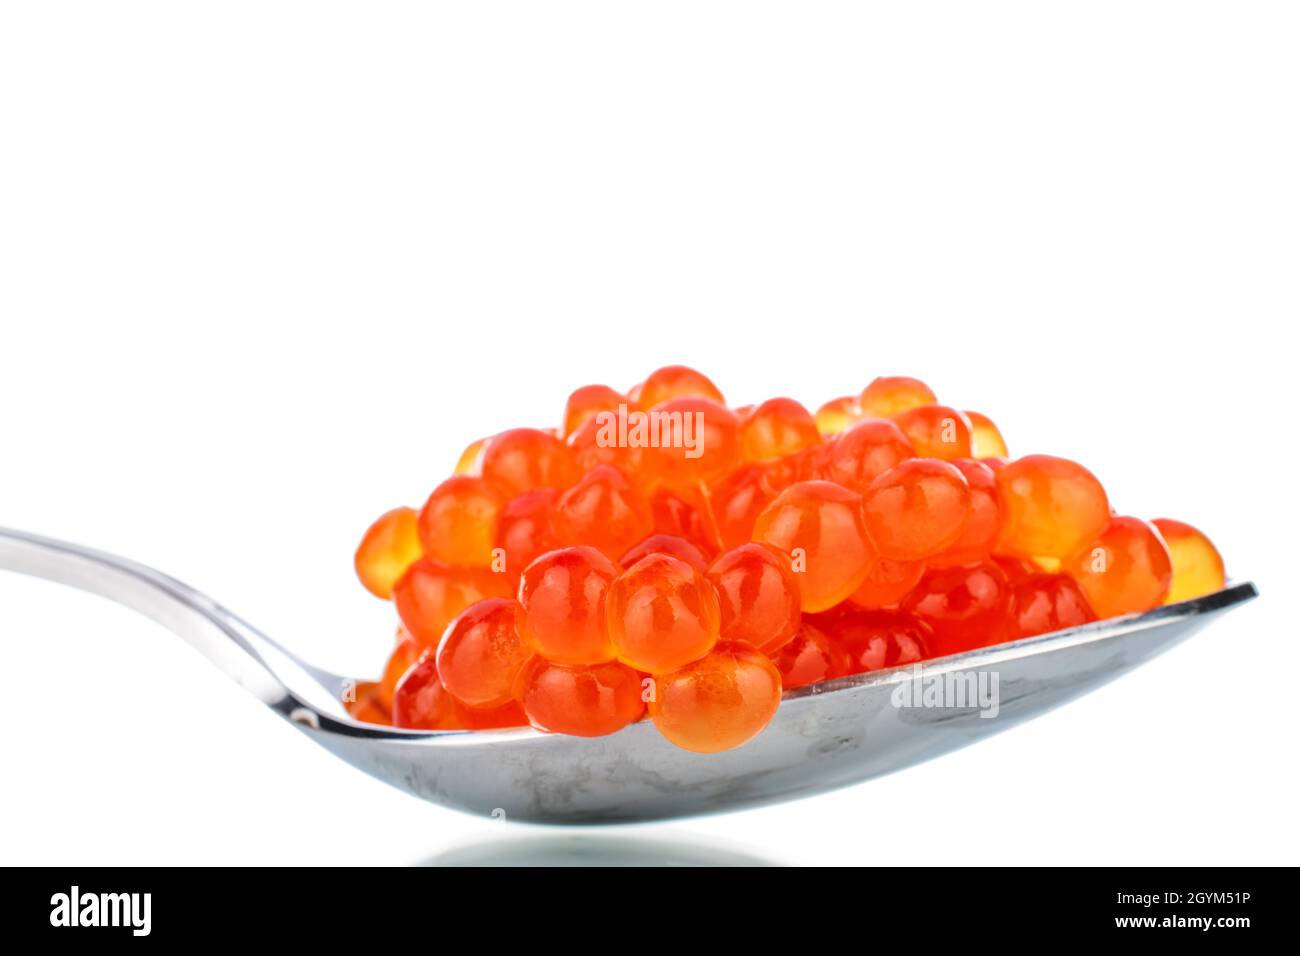 Lightly salted red chum salmon caviar with a metal spoon, close-up, isolated on white. Stock Photo